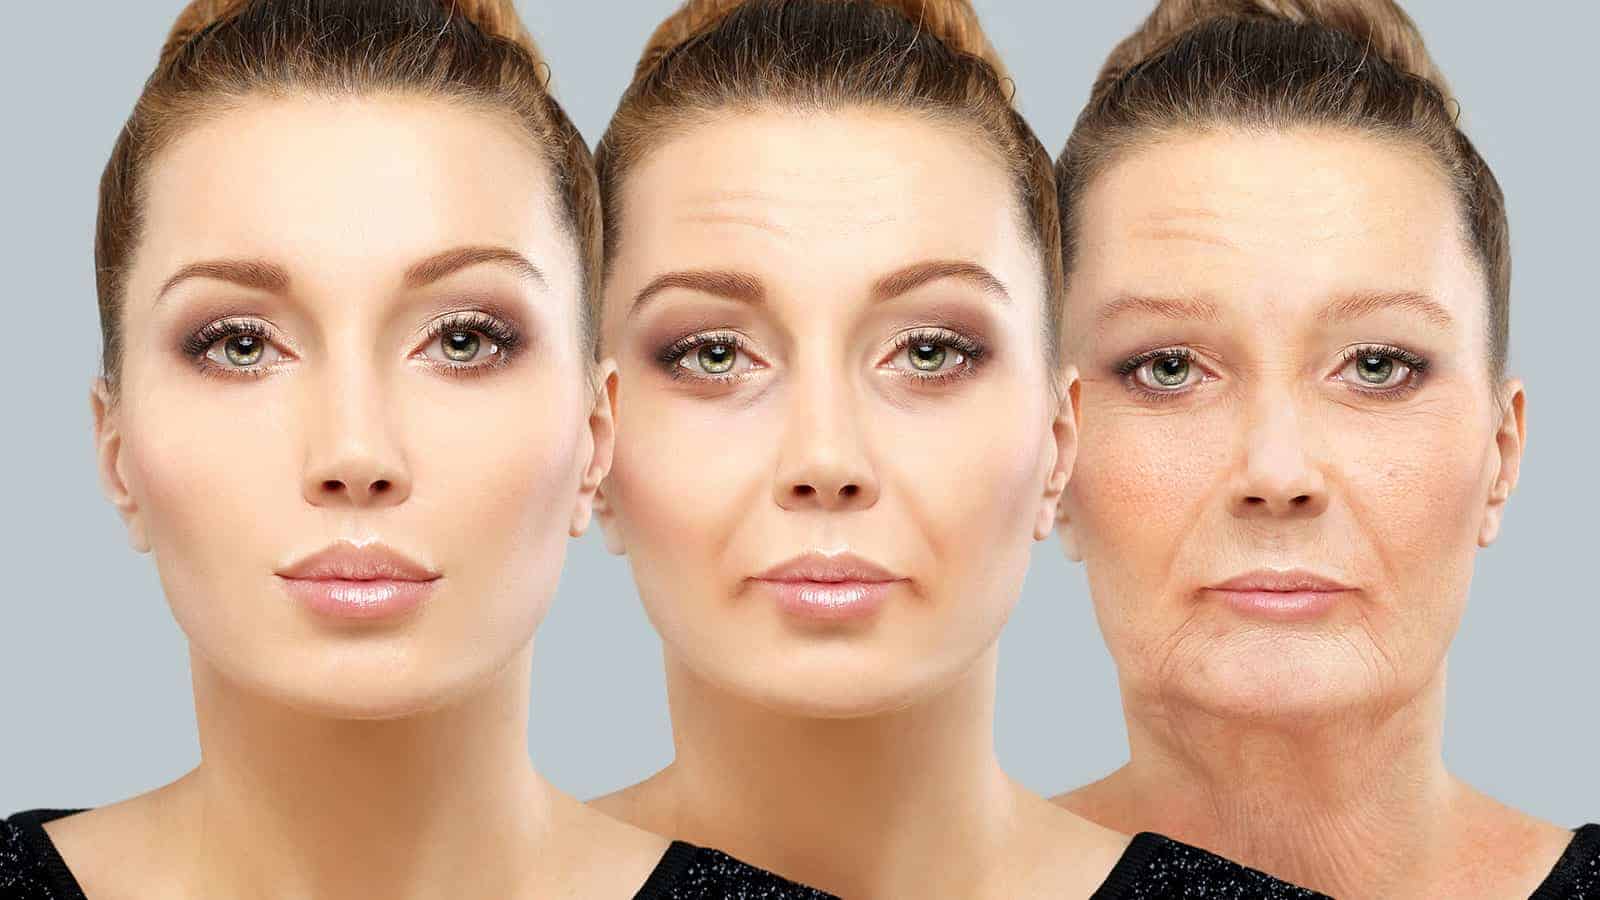 Researchers Reveal How Body Aging Occurs in 3 Different Shifts